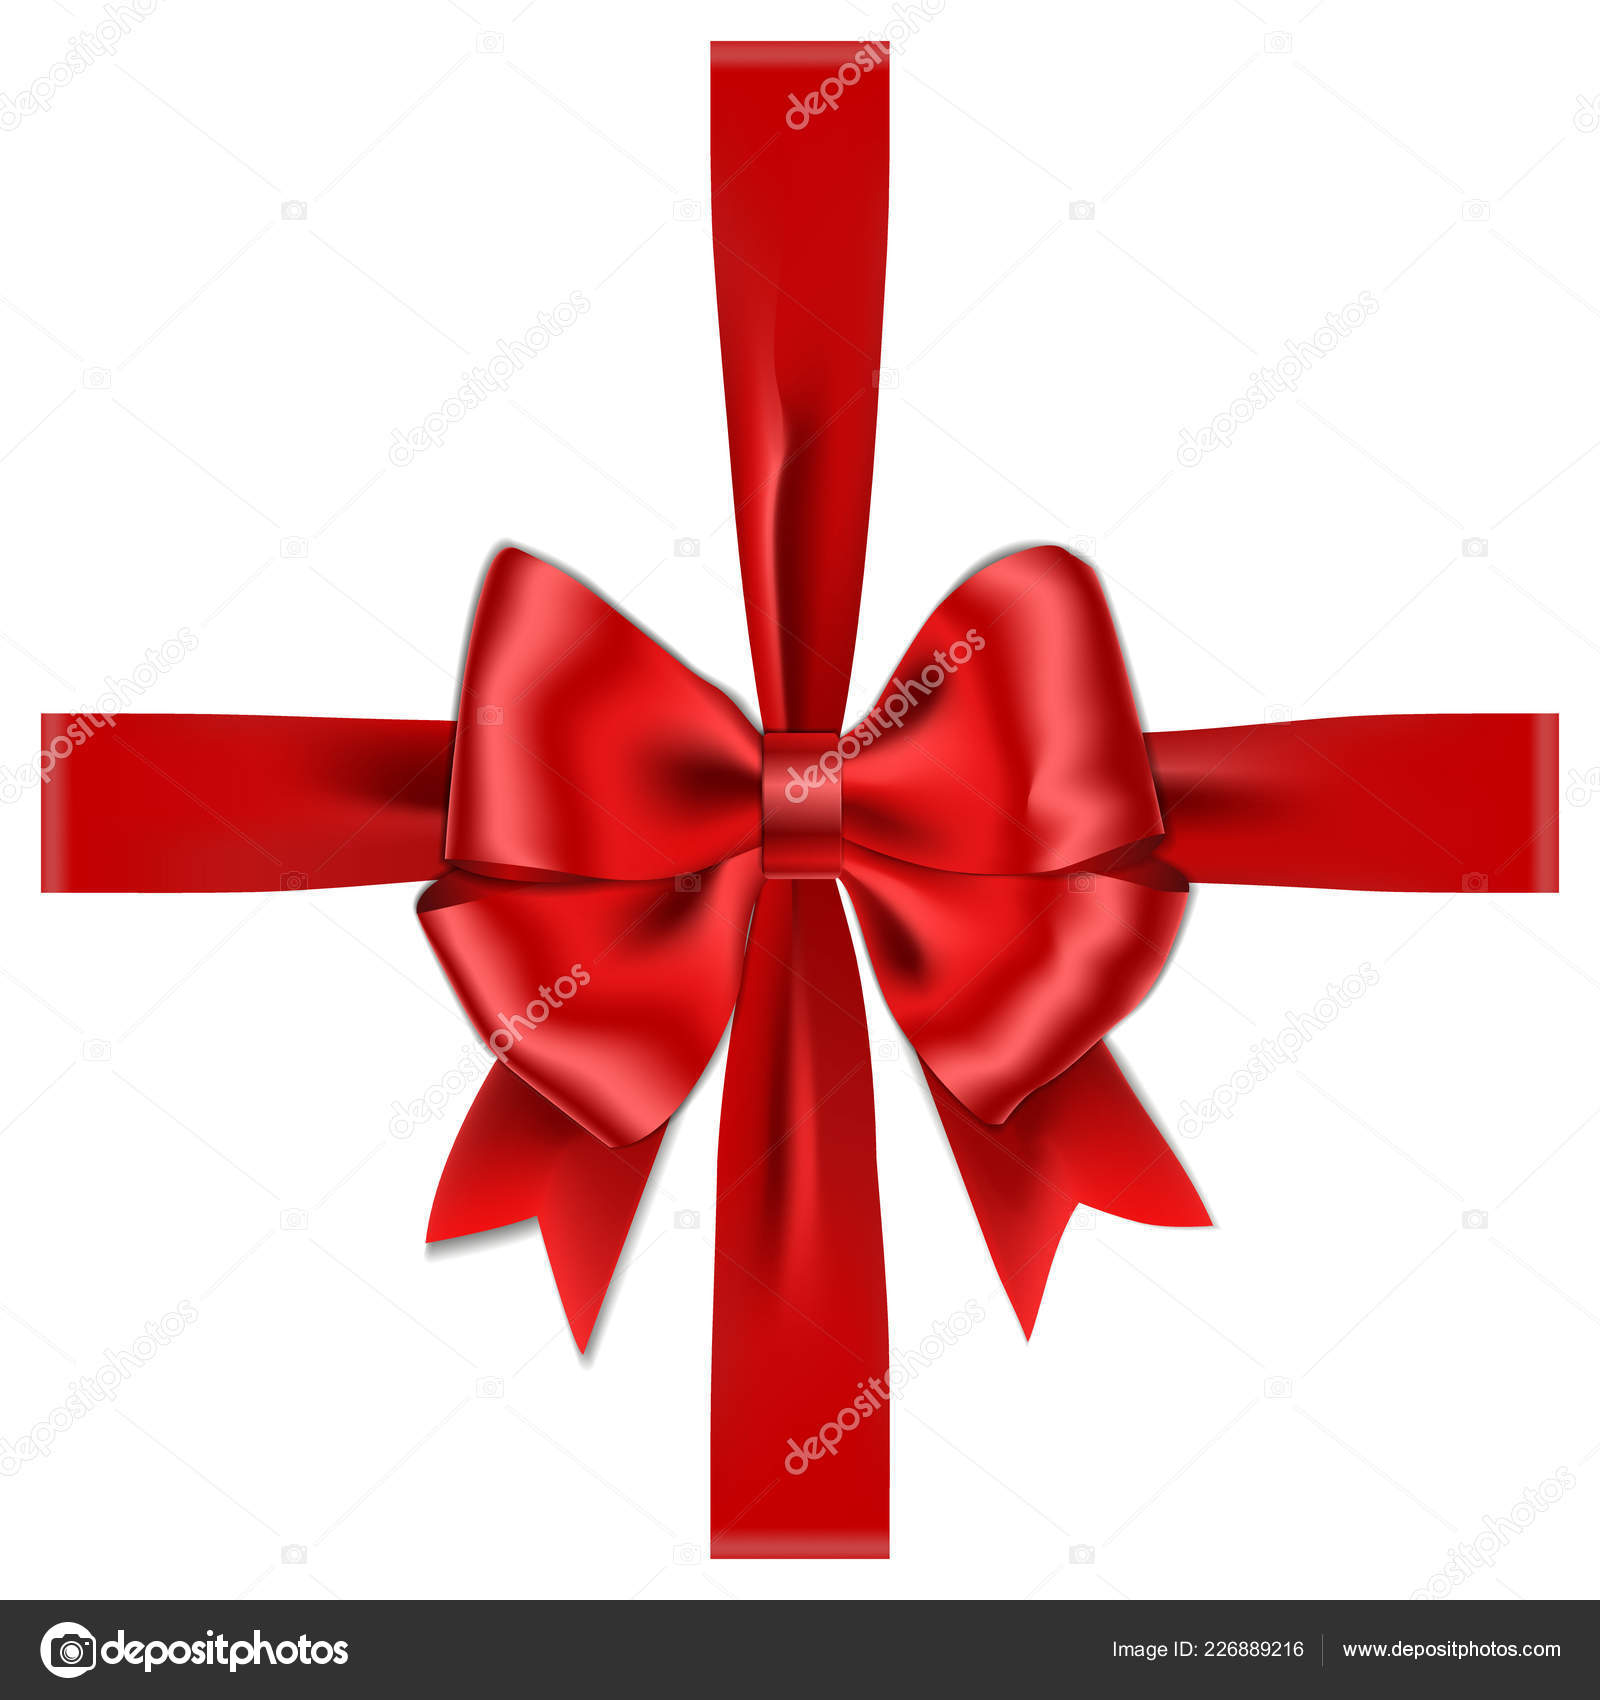 Decorative Red Bow with Long Red Ribbon Isolated on White